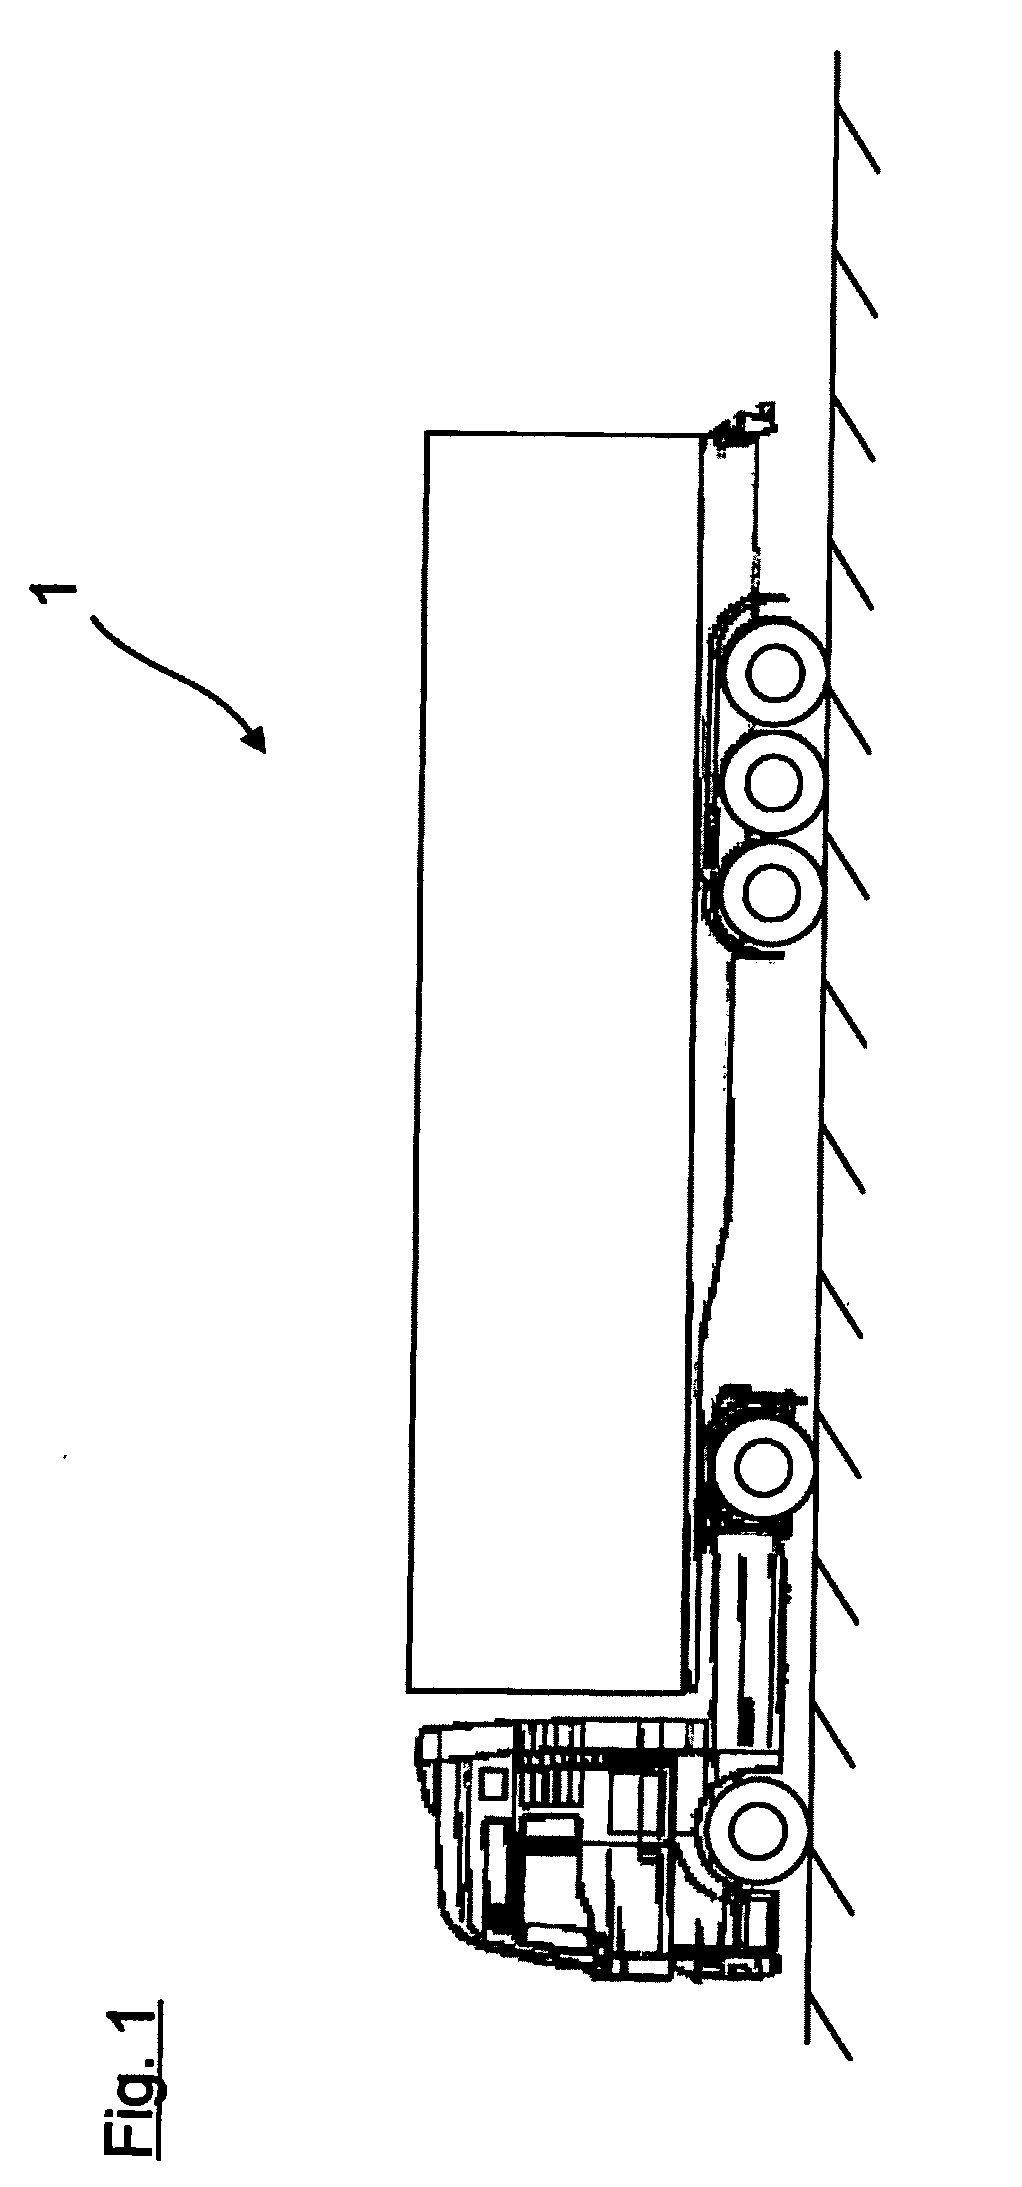 Method For Operating An Oil Circuit, In Particular For A Vehicle